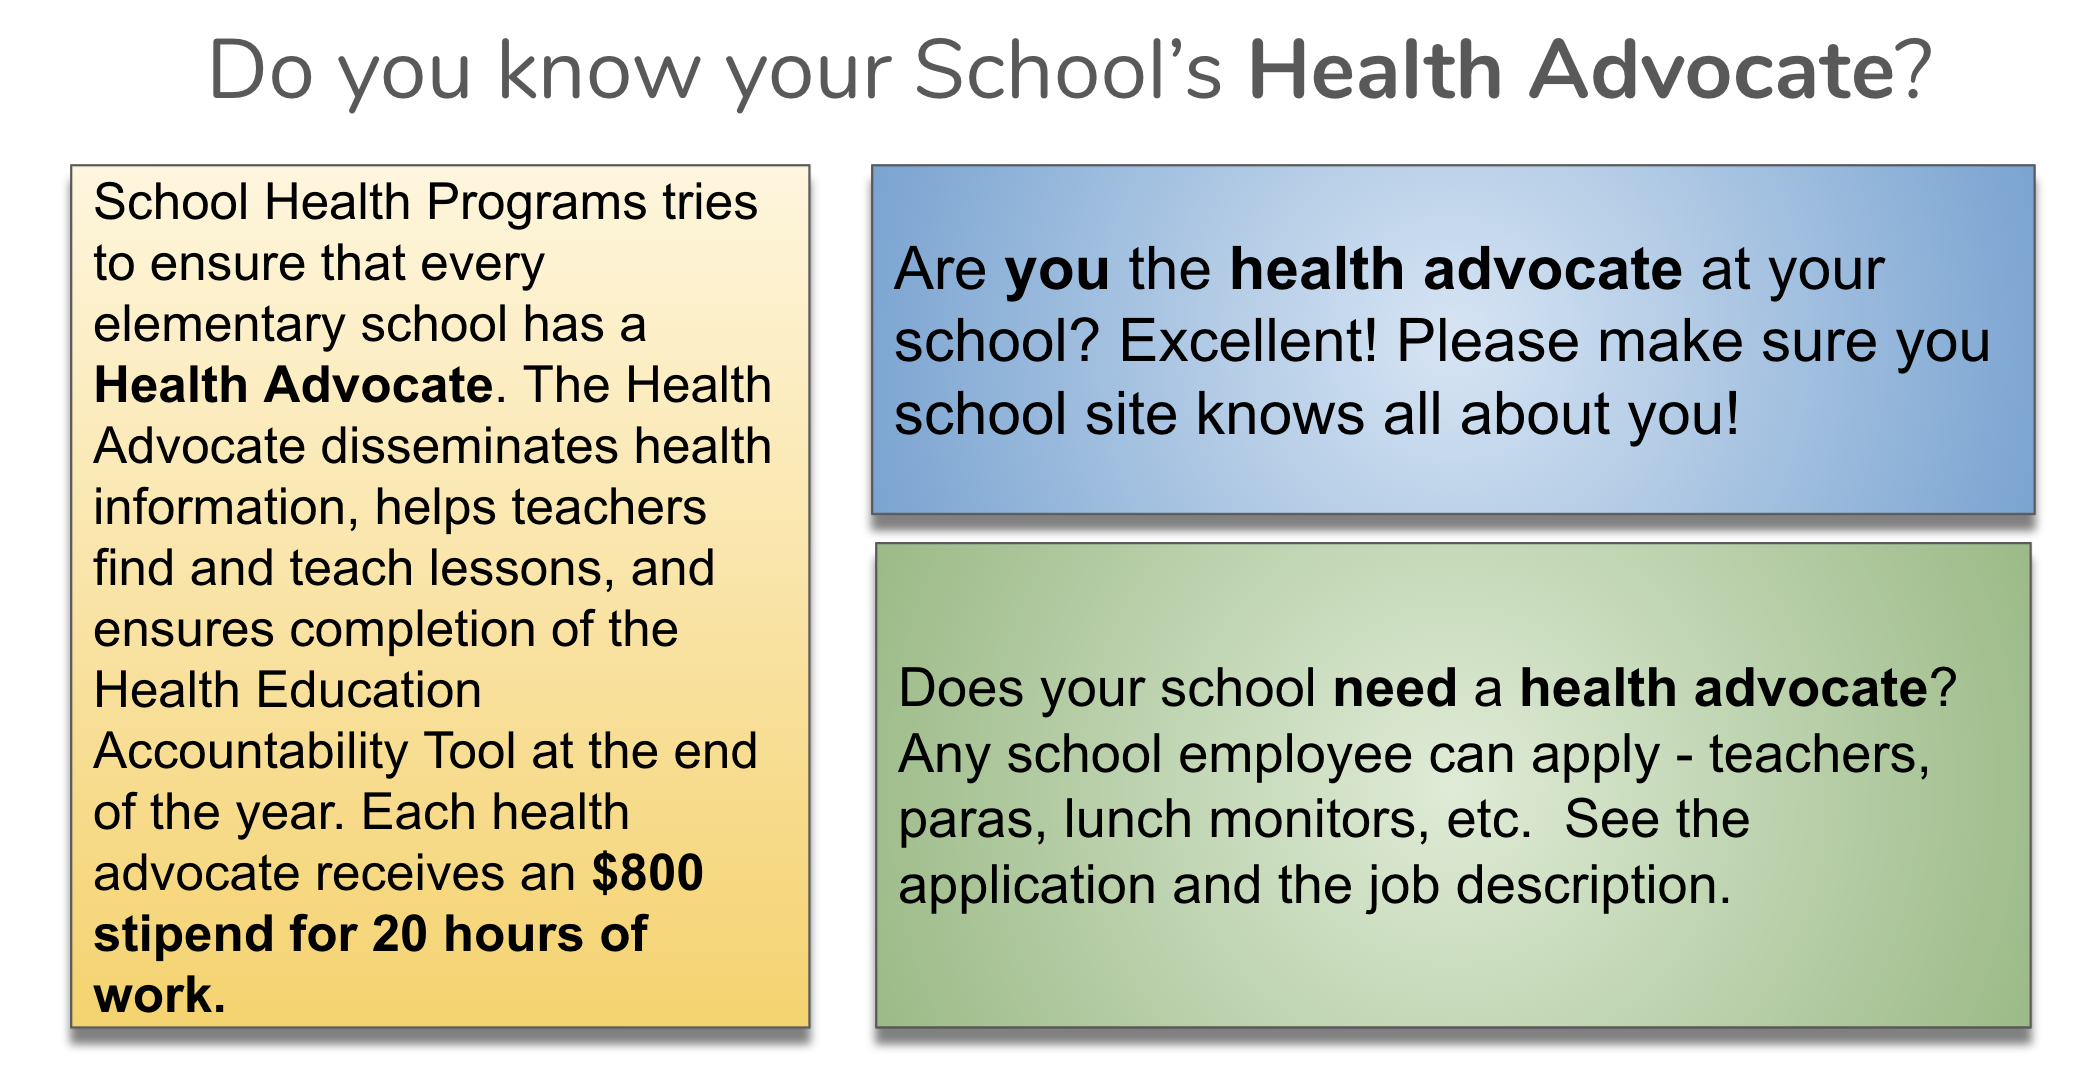 Do you know your health advocate